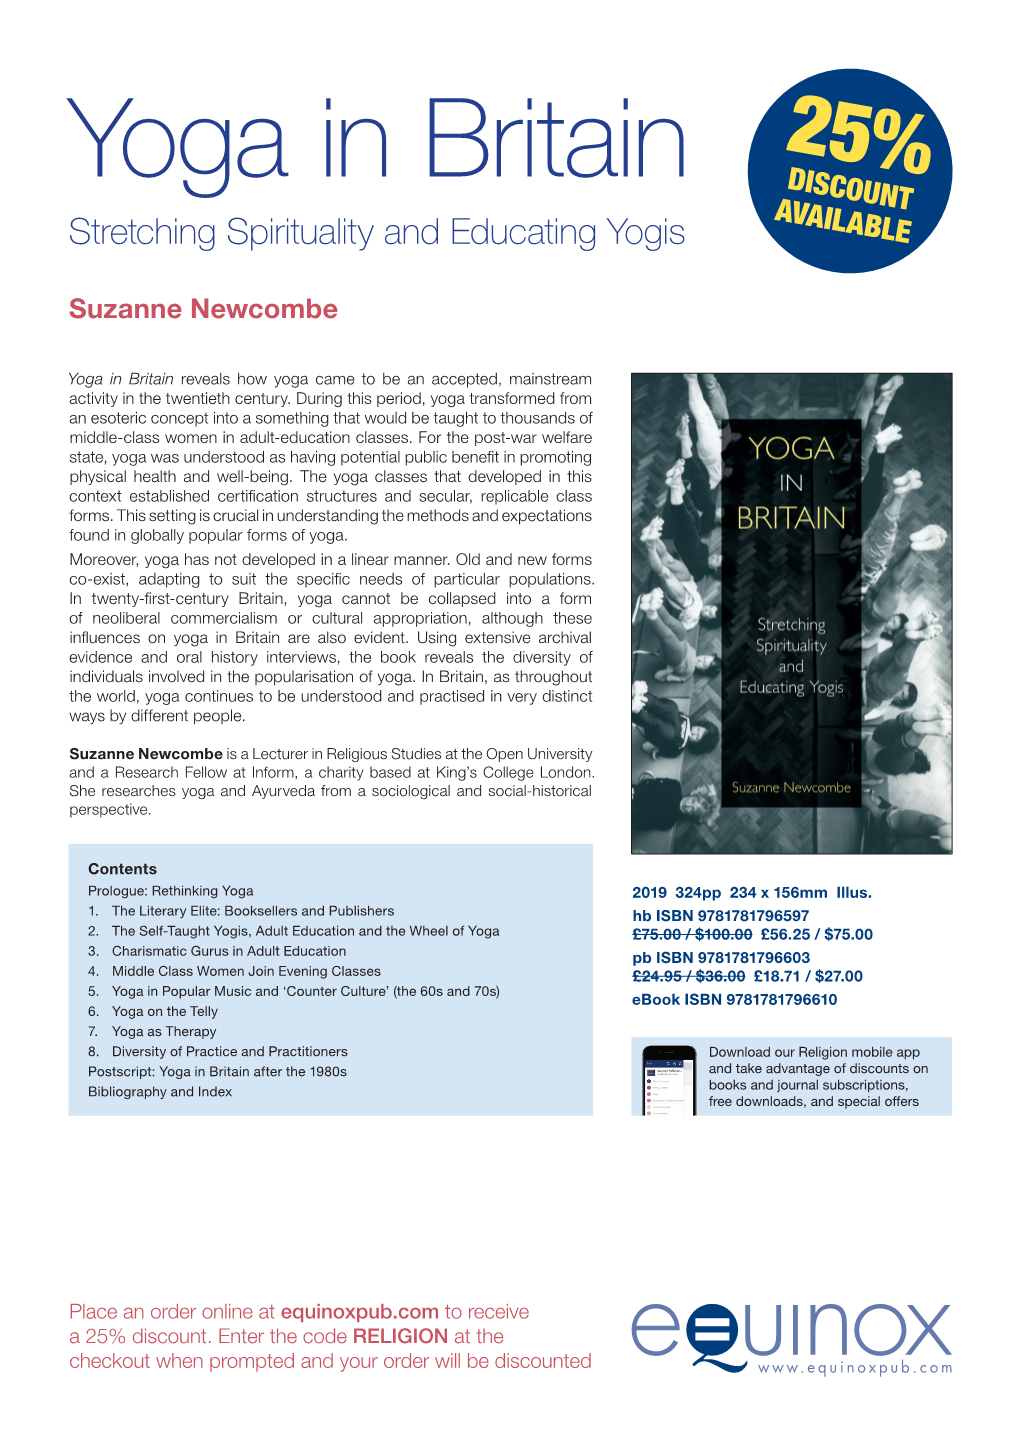 Yoga in Britain Discount Ava Stretching Spirituality and Educating Yogis Ilable